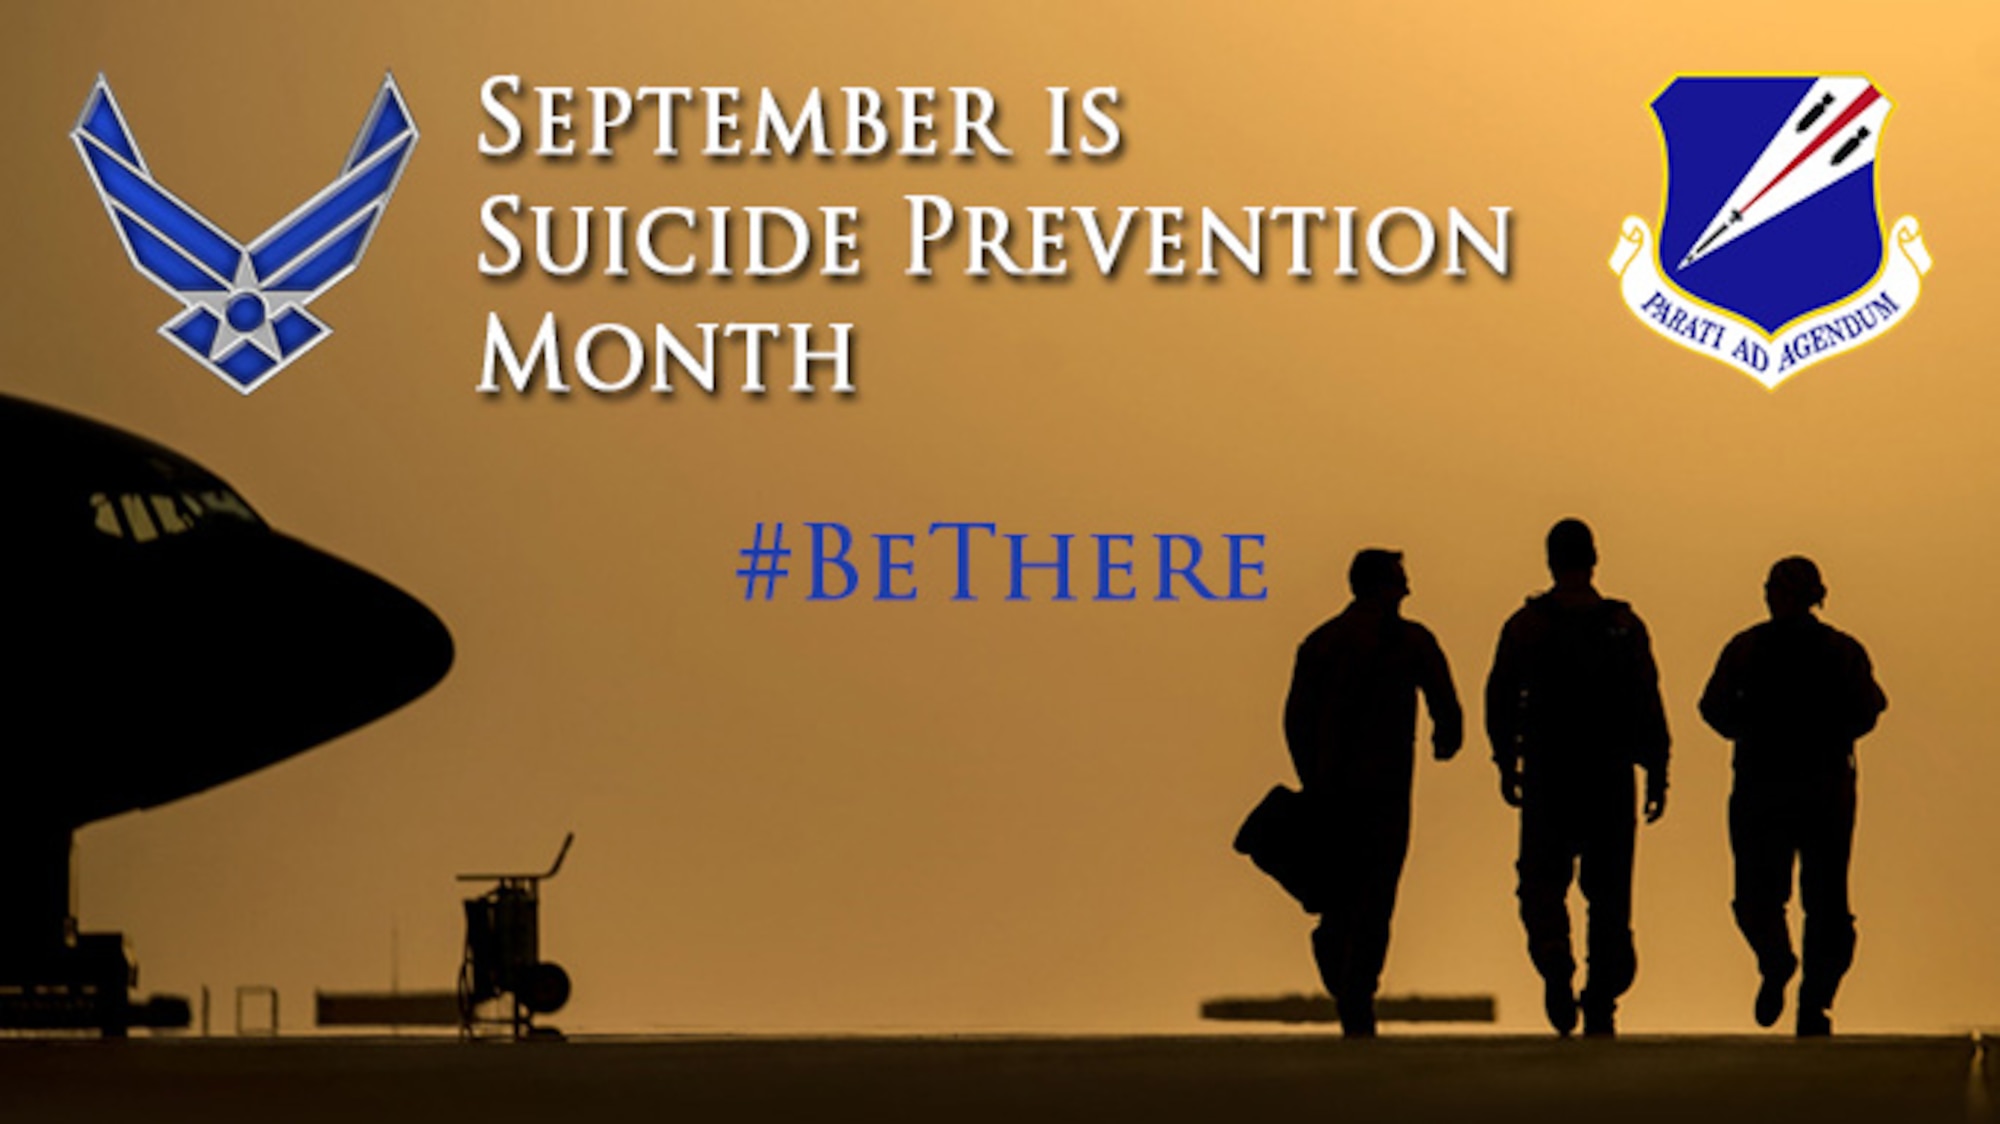 Every Citizen Airman of the Missouri Air National Guard's 131st Bomb Wing plays a role in suicide prevention.  #BeThere